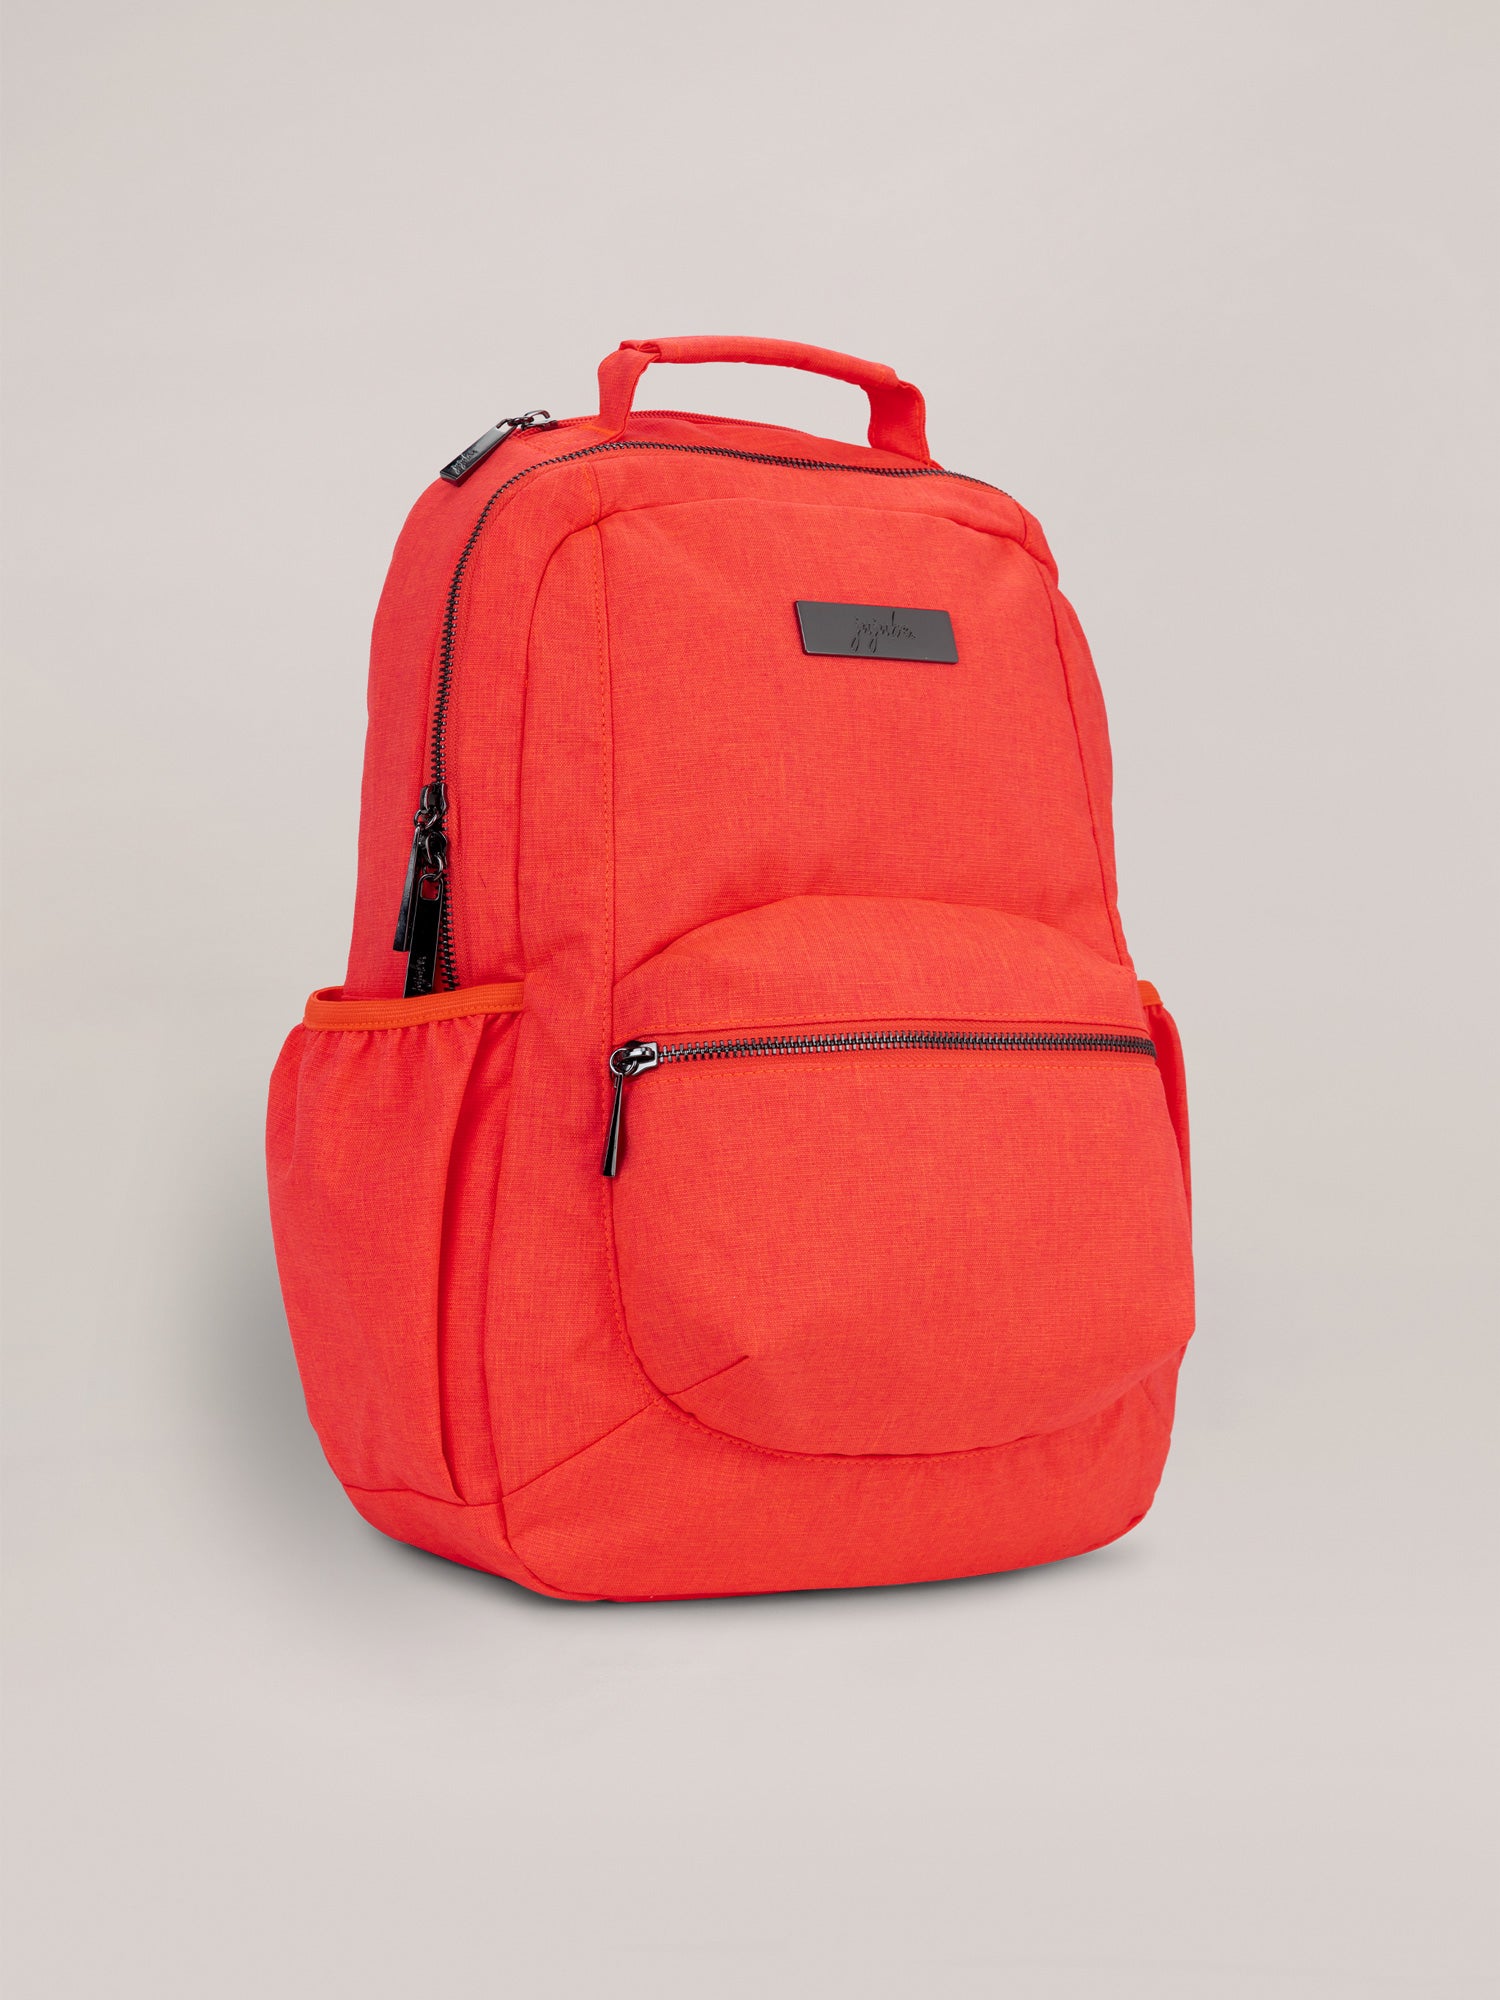 Neon Coral Be Packed Backpack Quarter Angle View